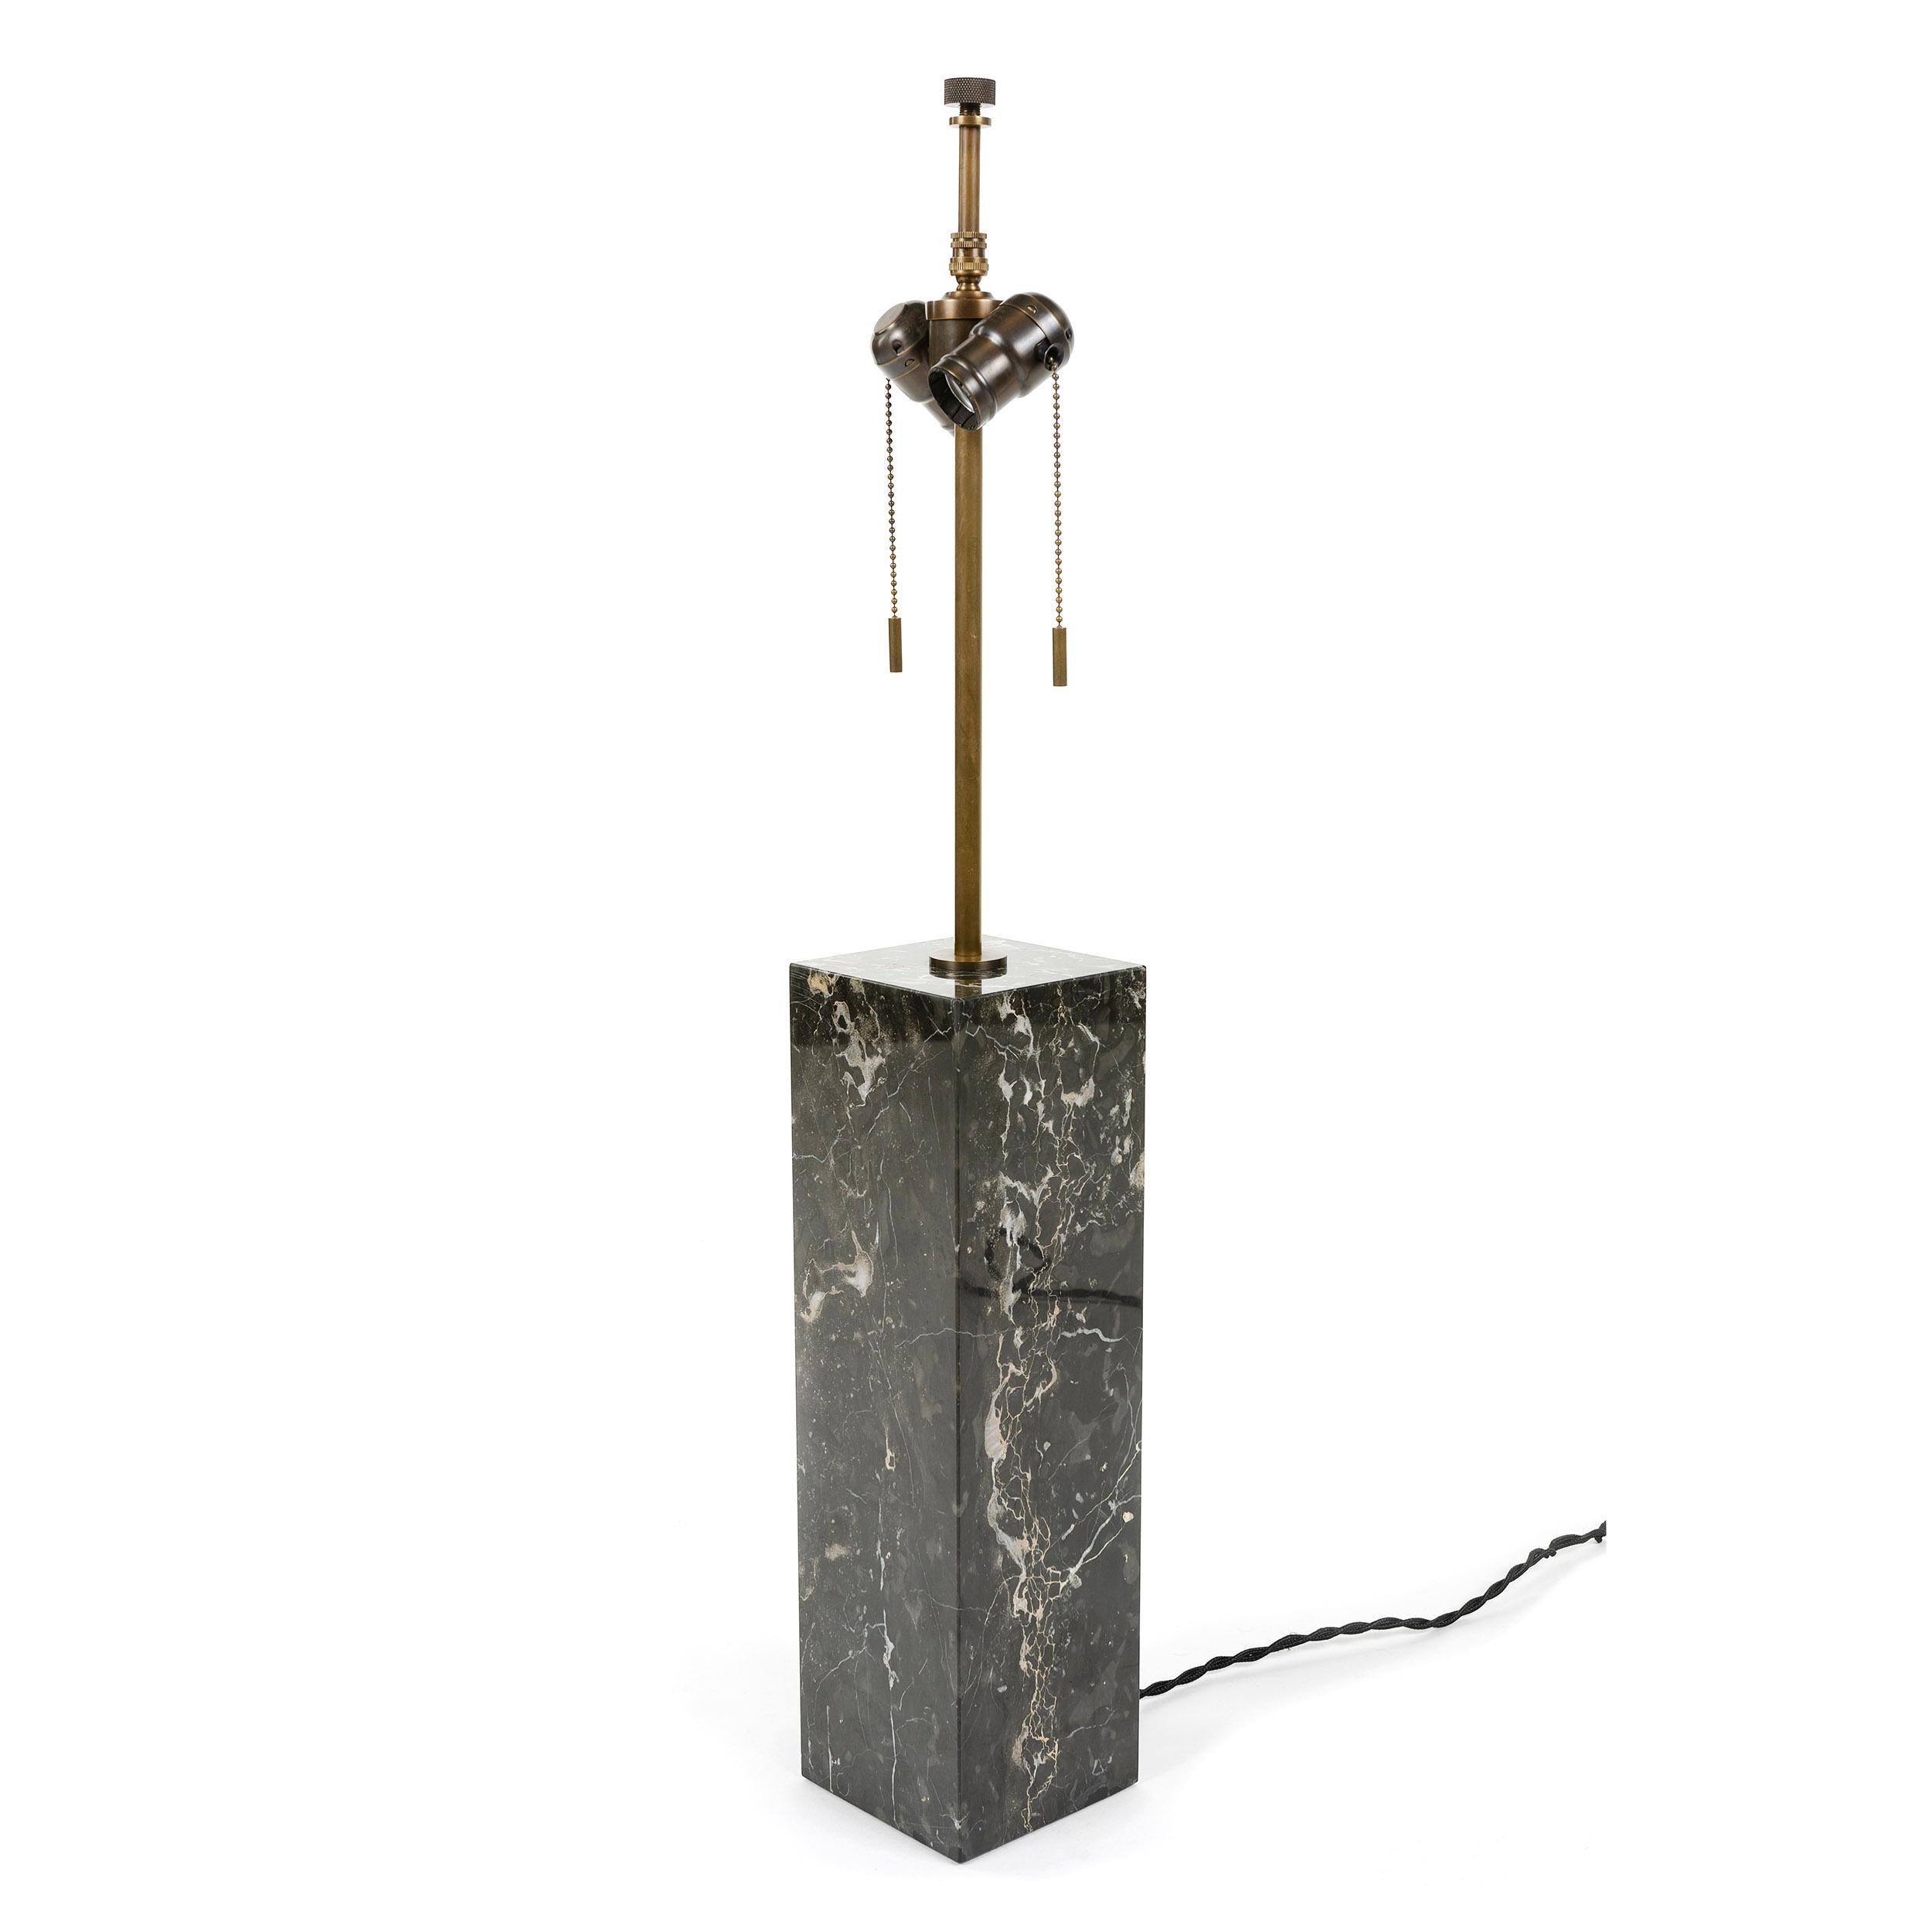 Rectangular black marble table lamp with patinated brass hardware. Marble base height 16 inches.